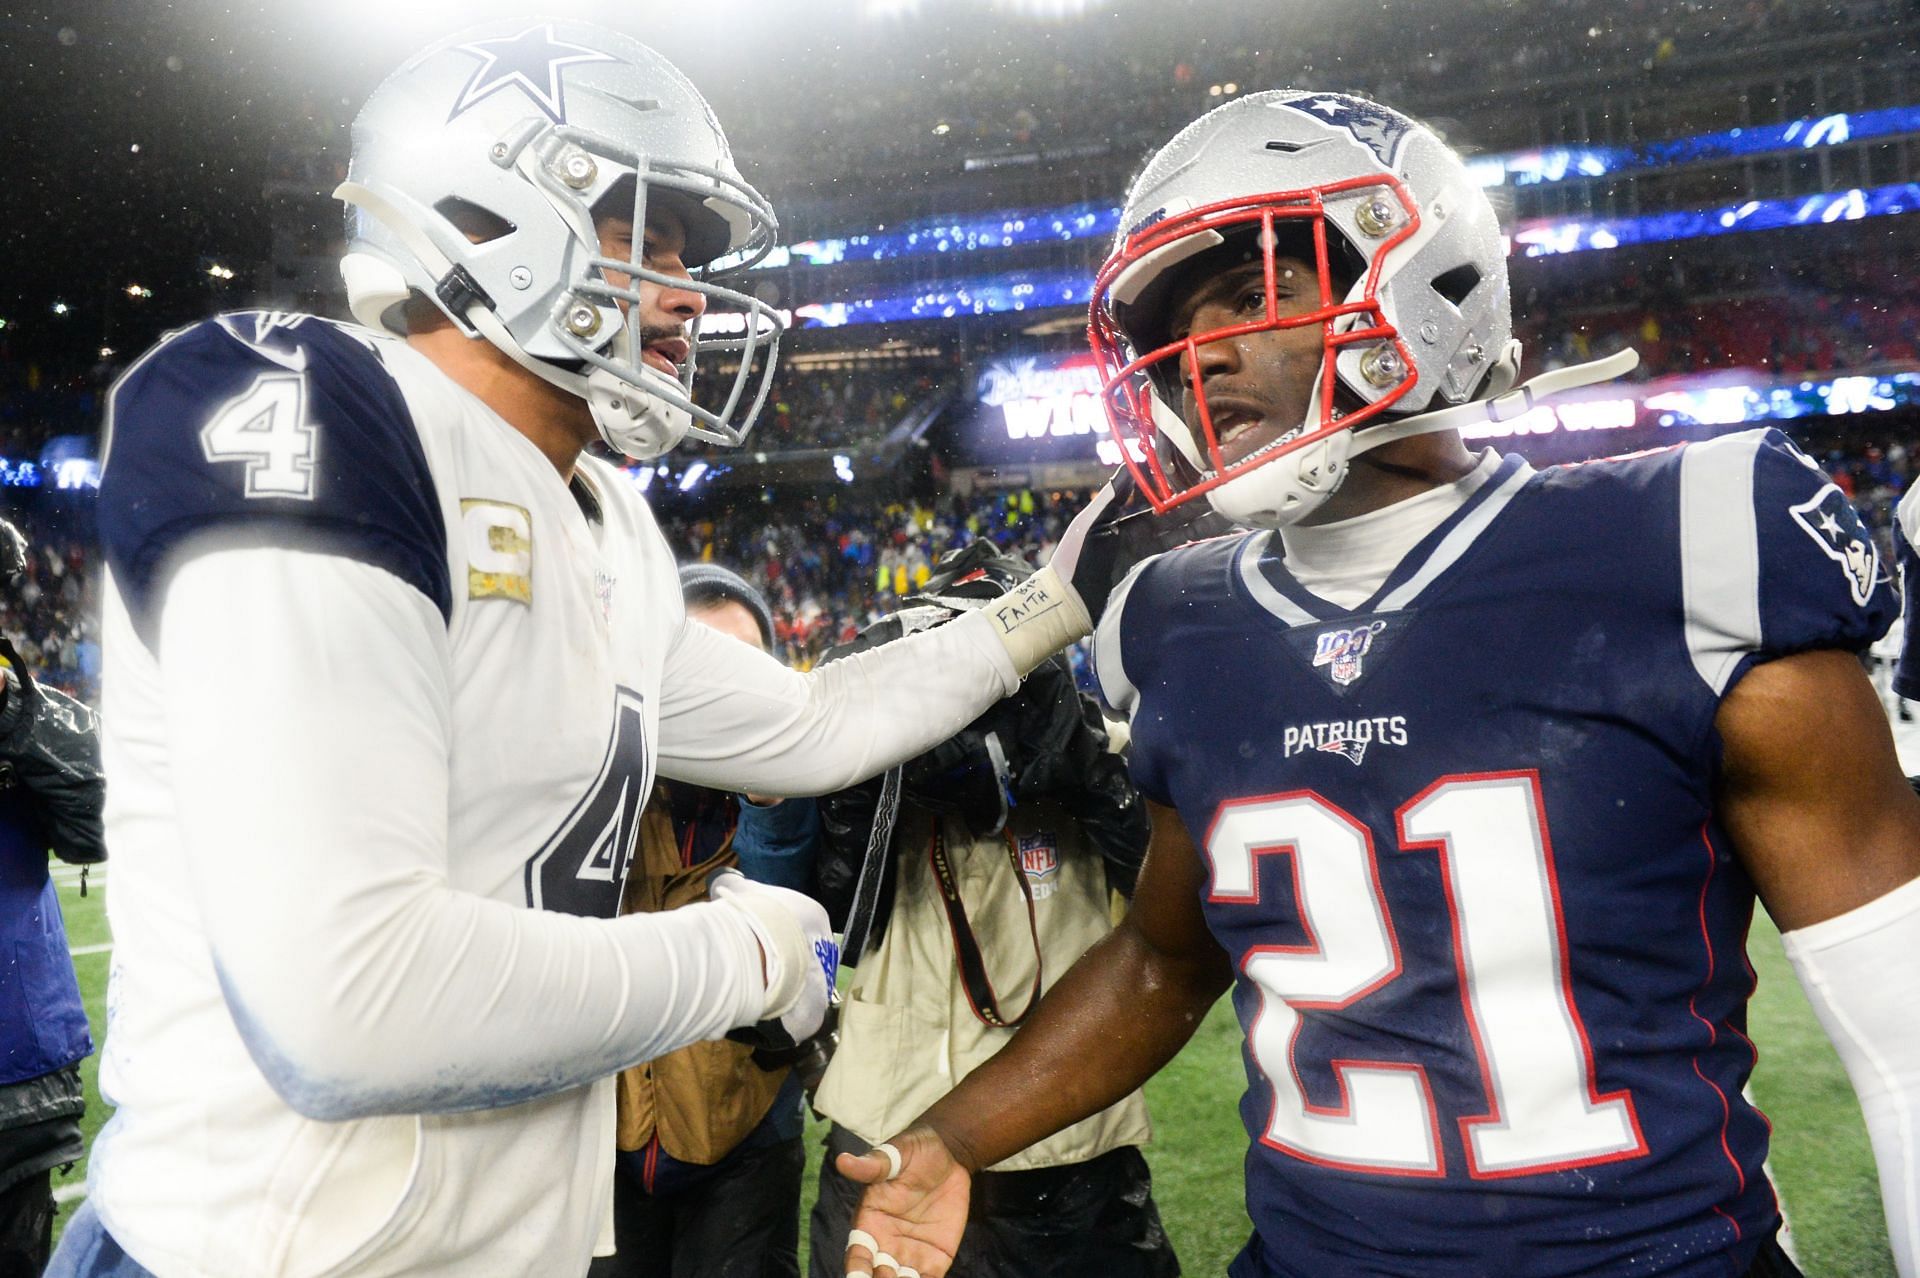 The Dallas Cowboys face the New England Patriots in Week 6